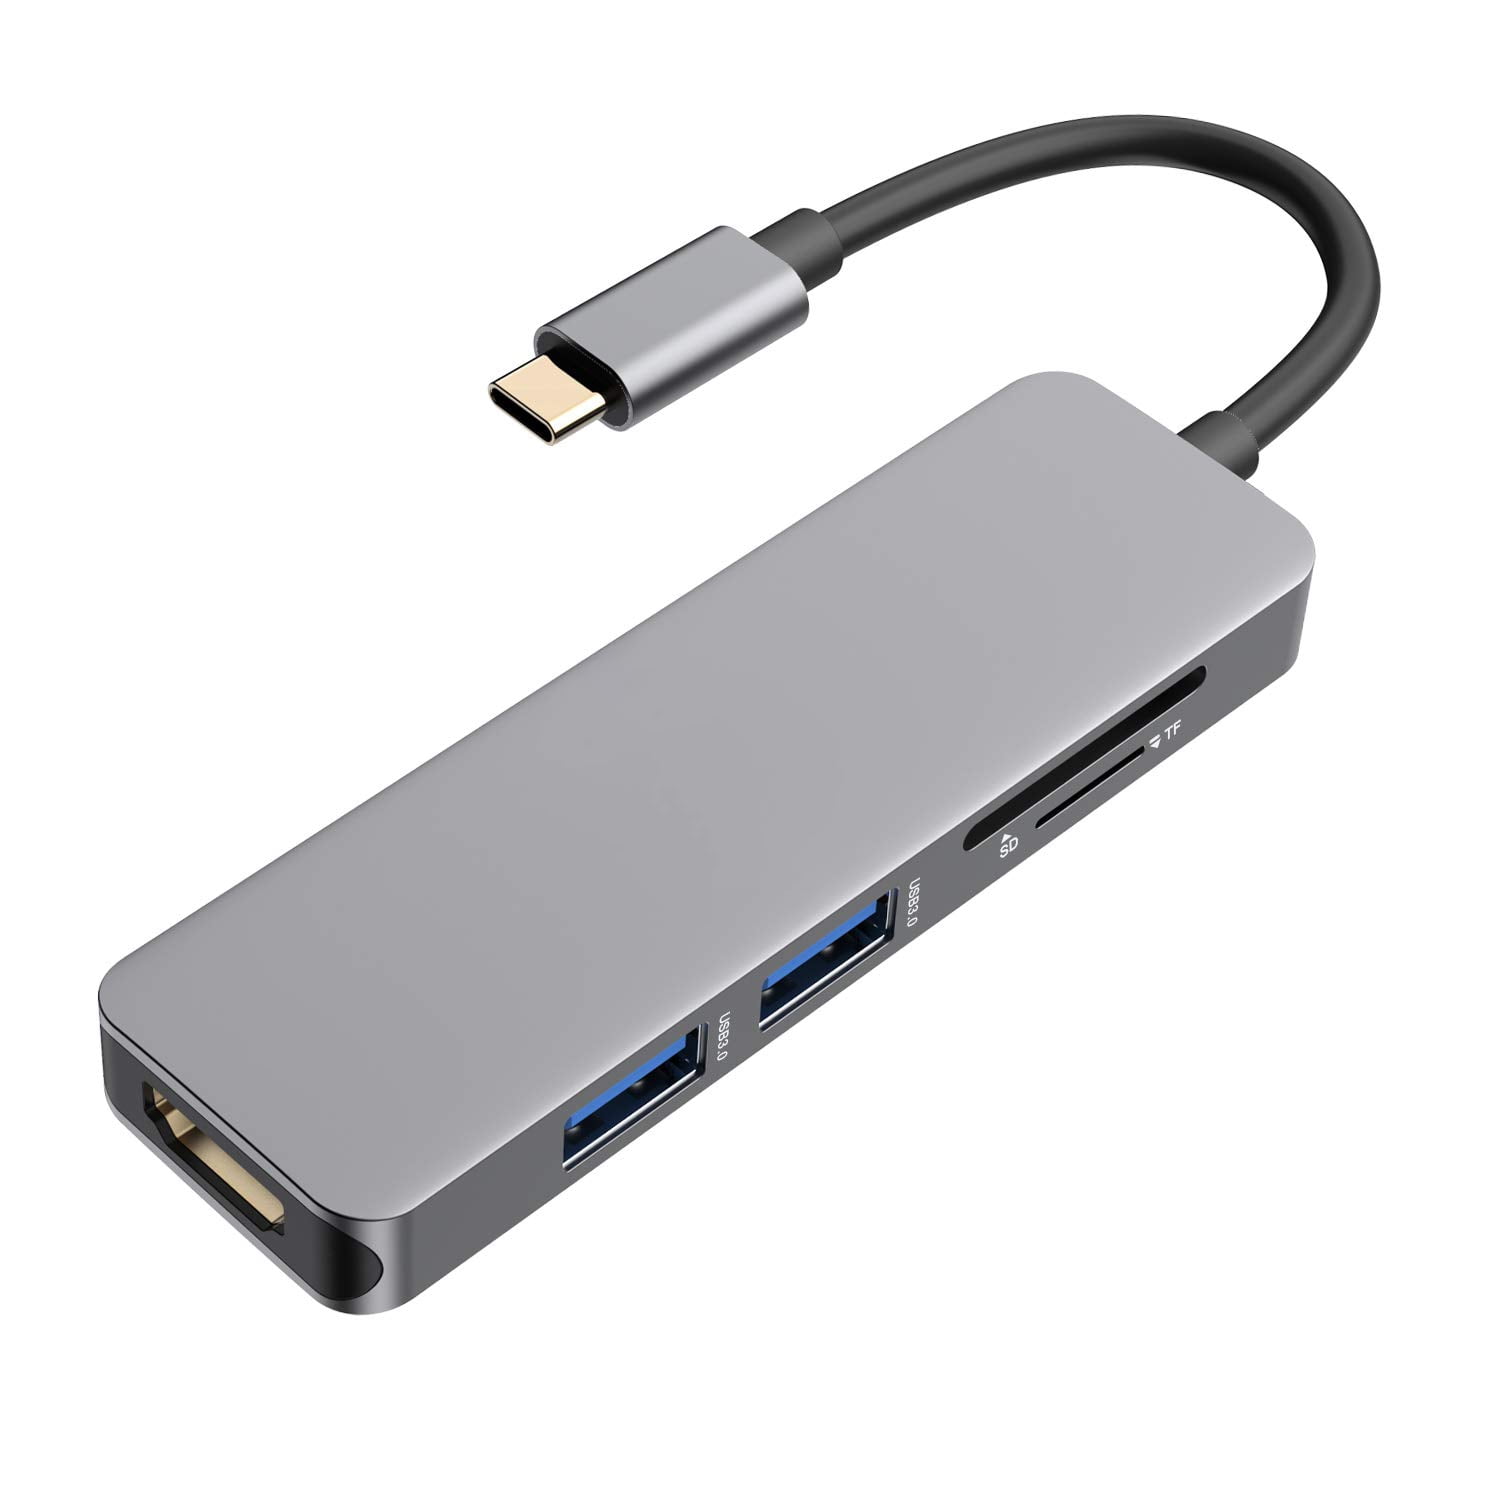 Hdmi Adapter 4k Usb C To, How To Mirror Iphone Macbook Air With Usb C Hdmi